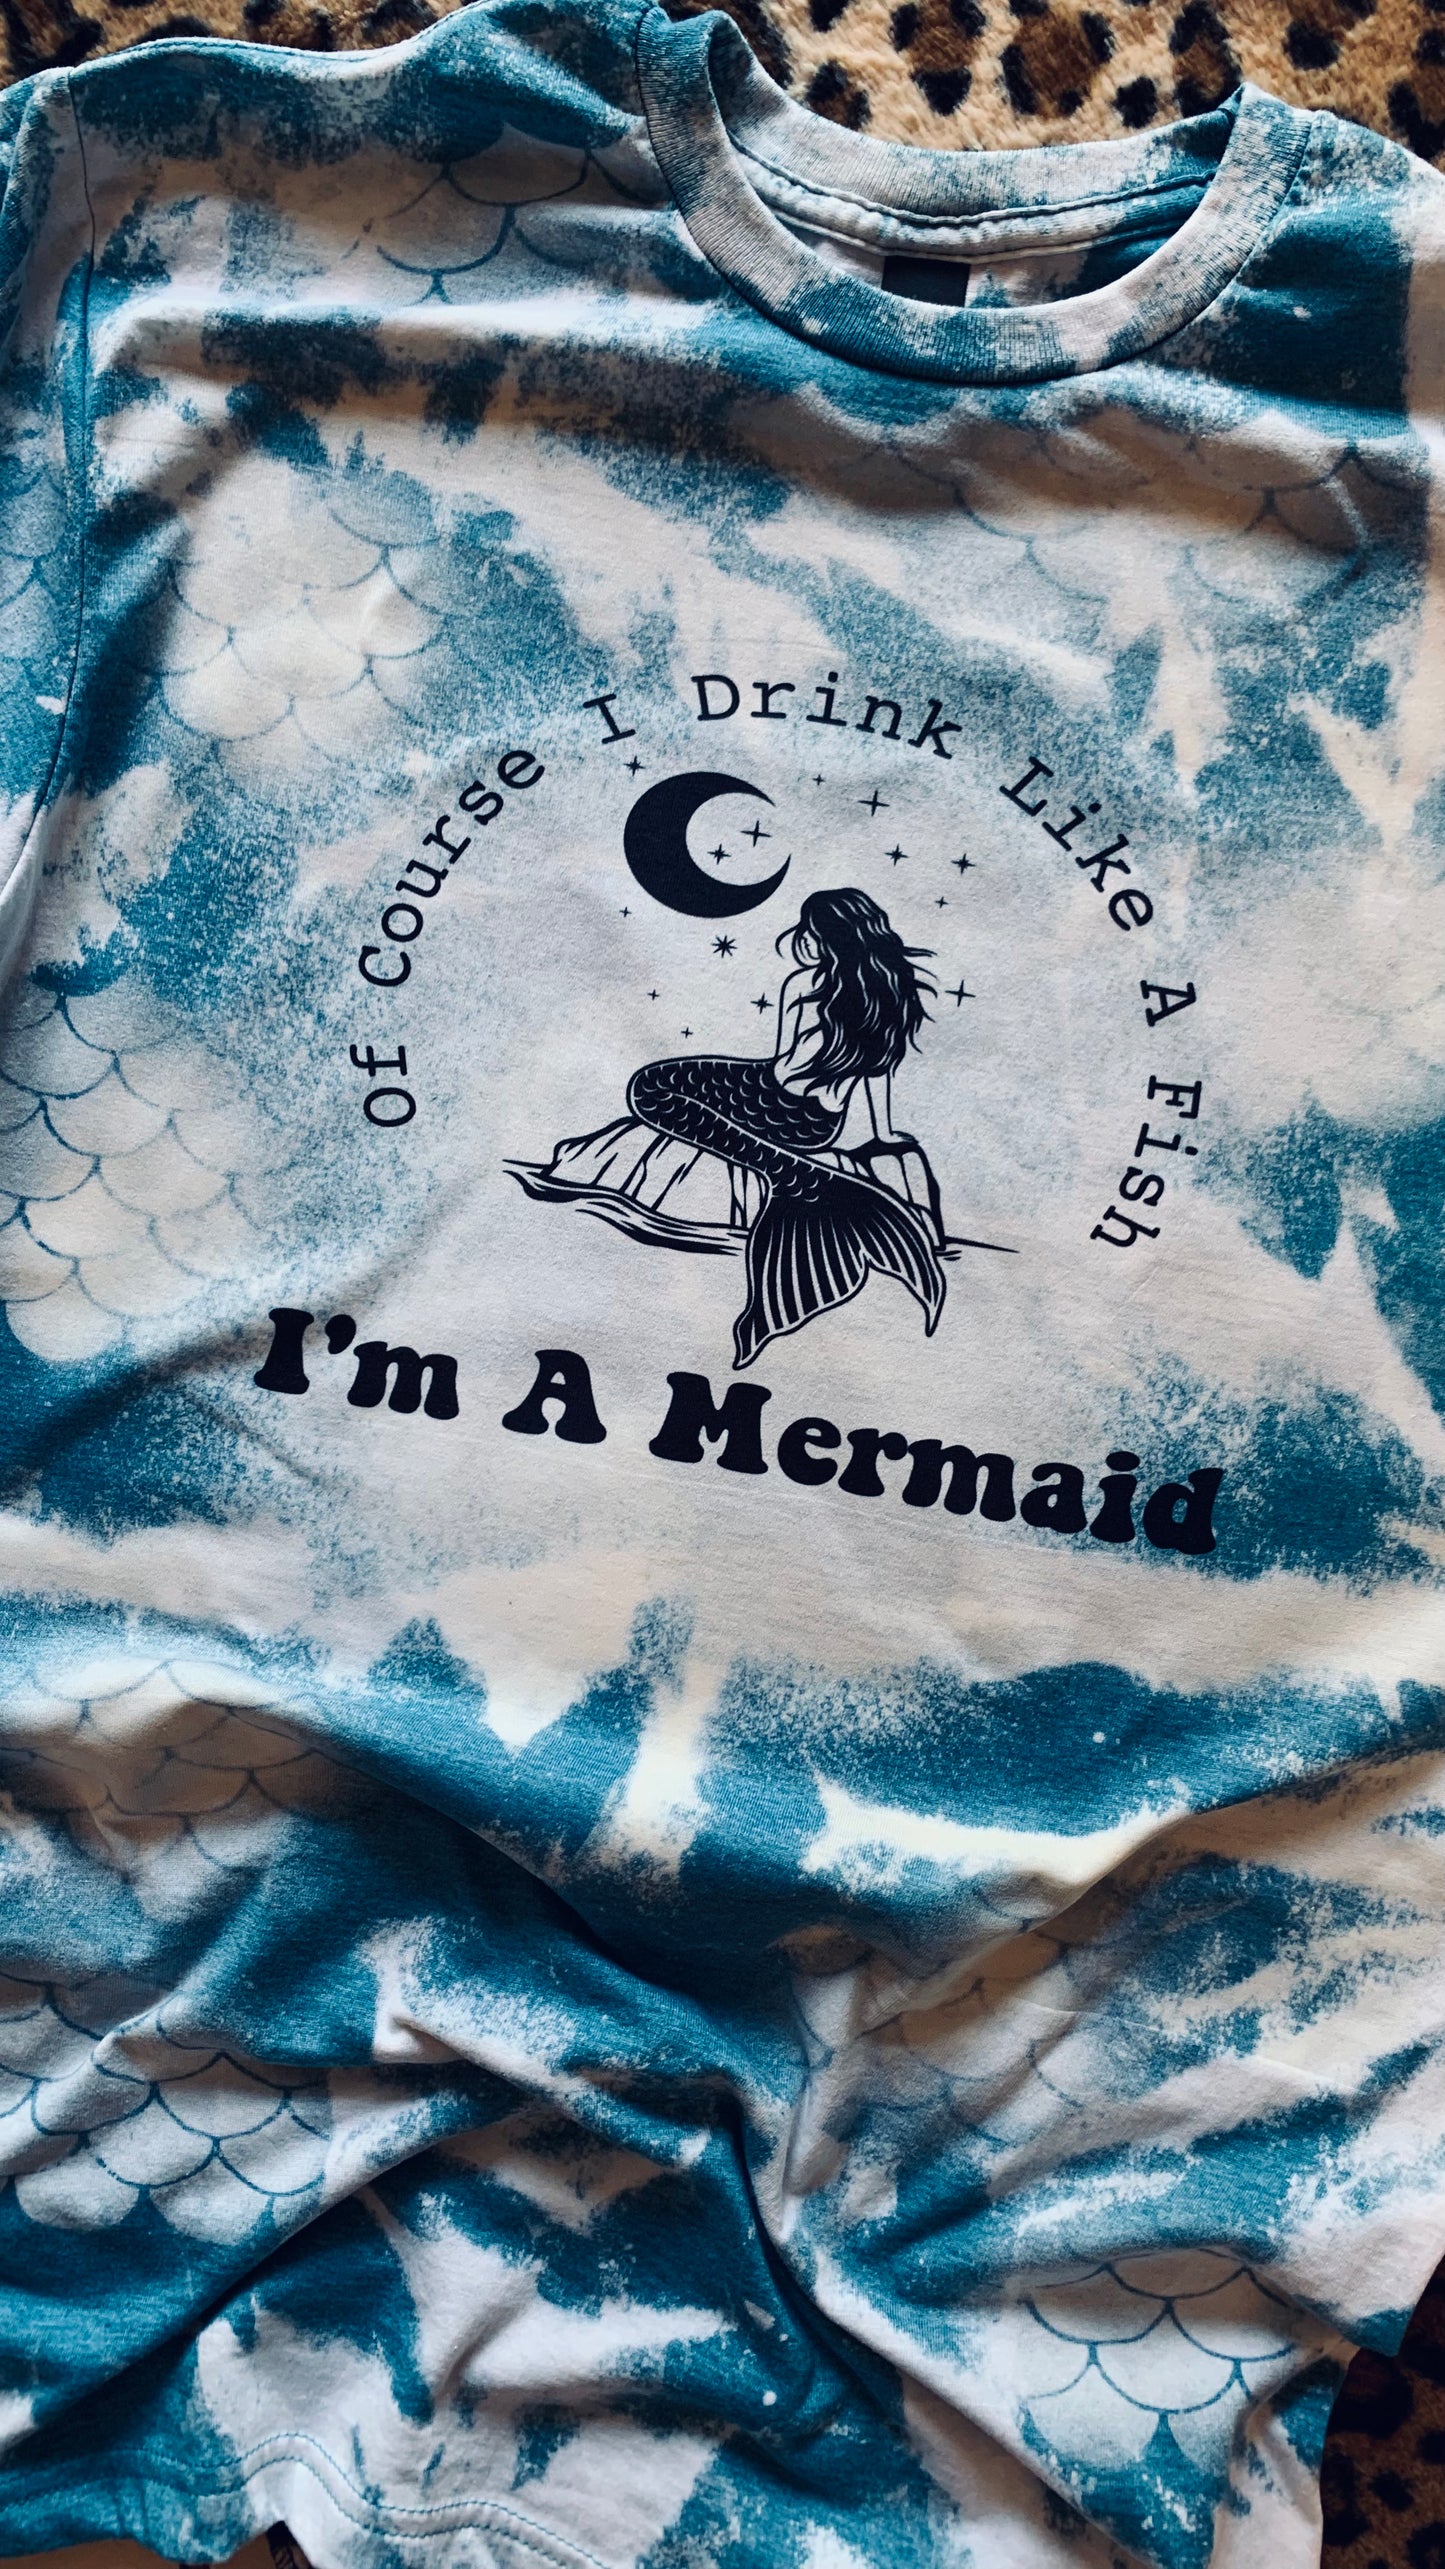 Of course I Drink Like a Fish I’m a Mermaid